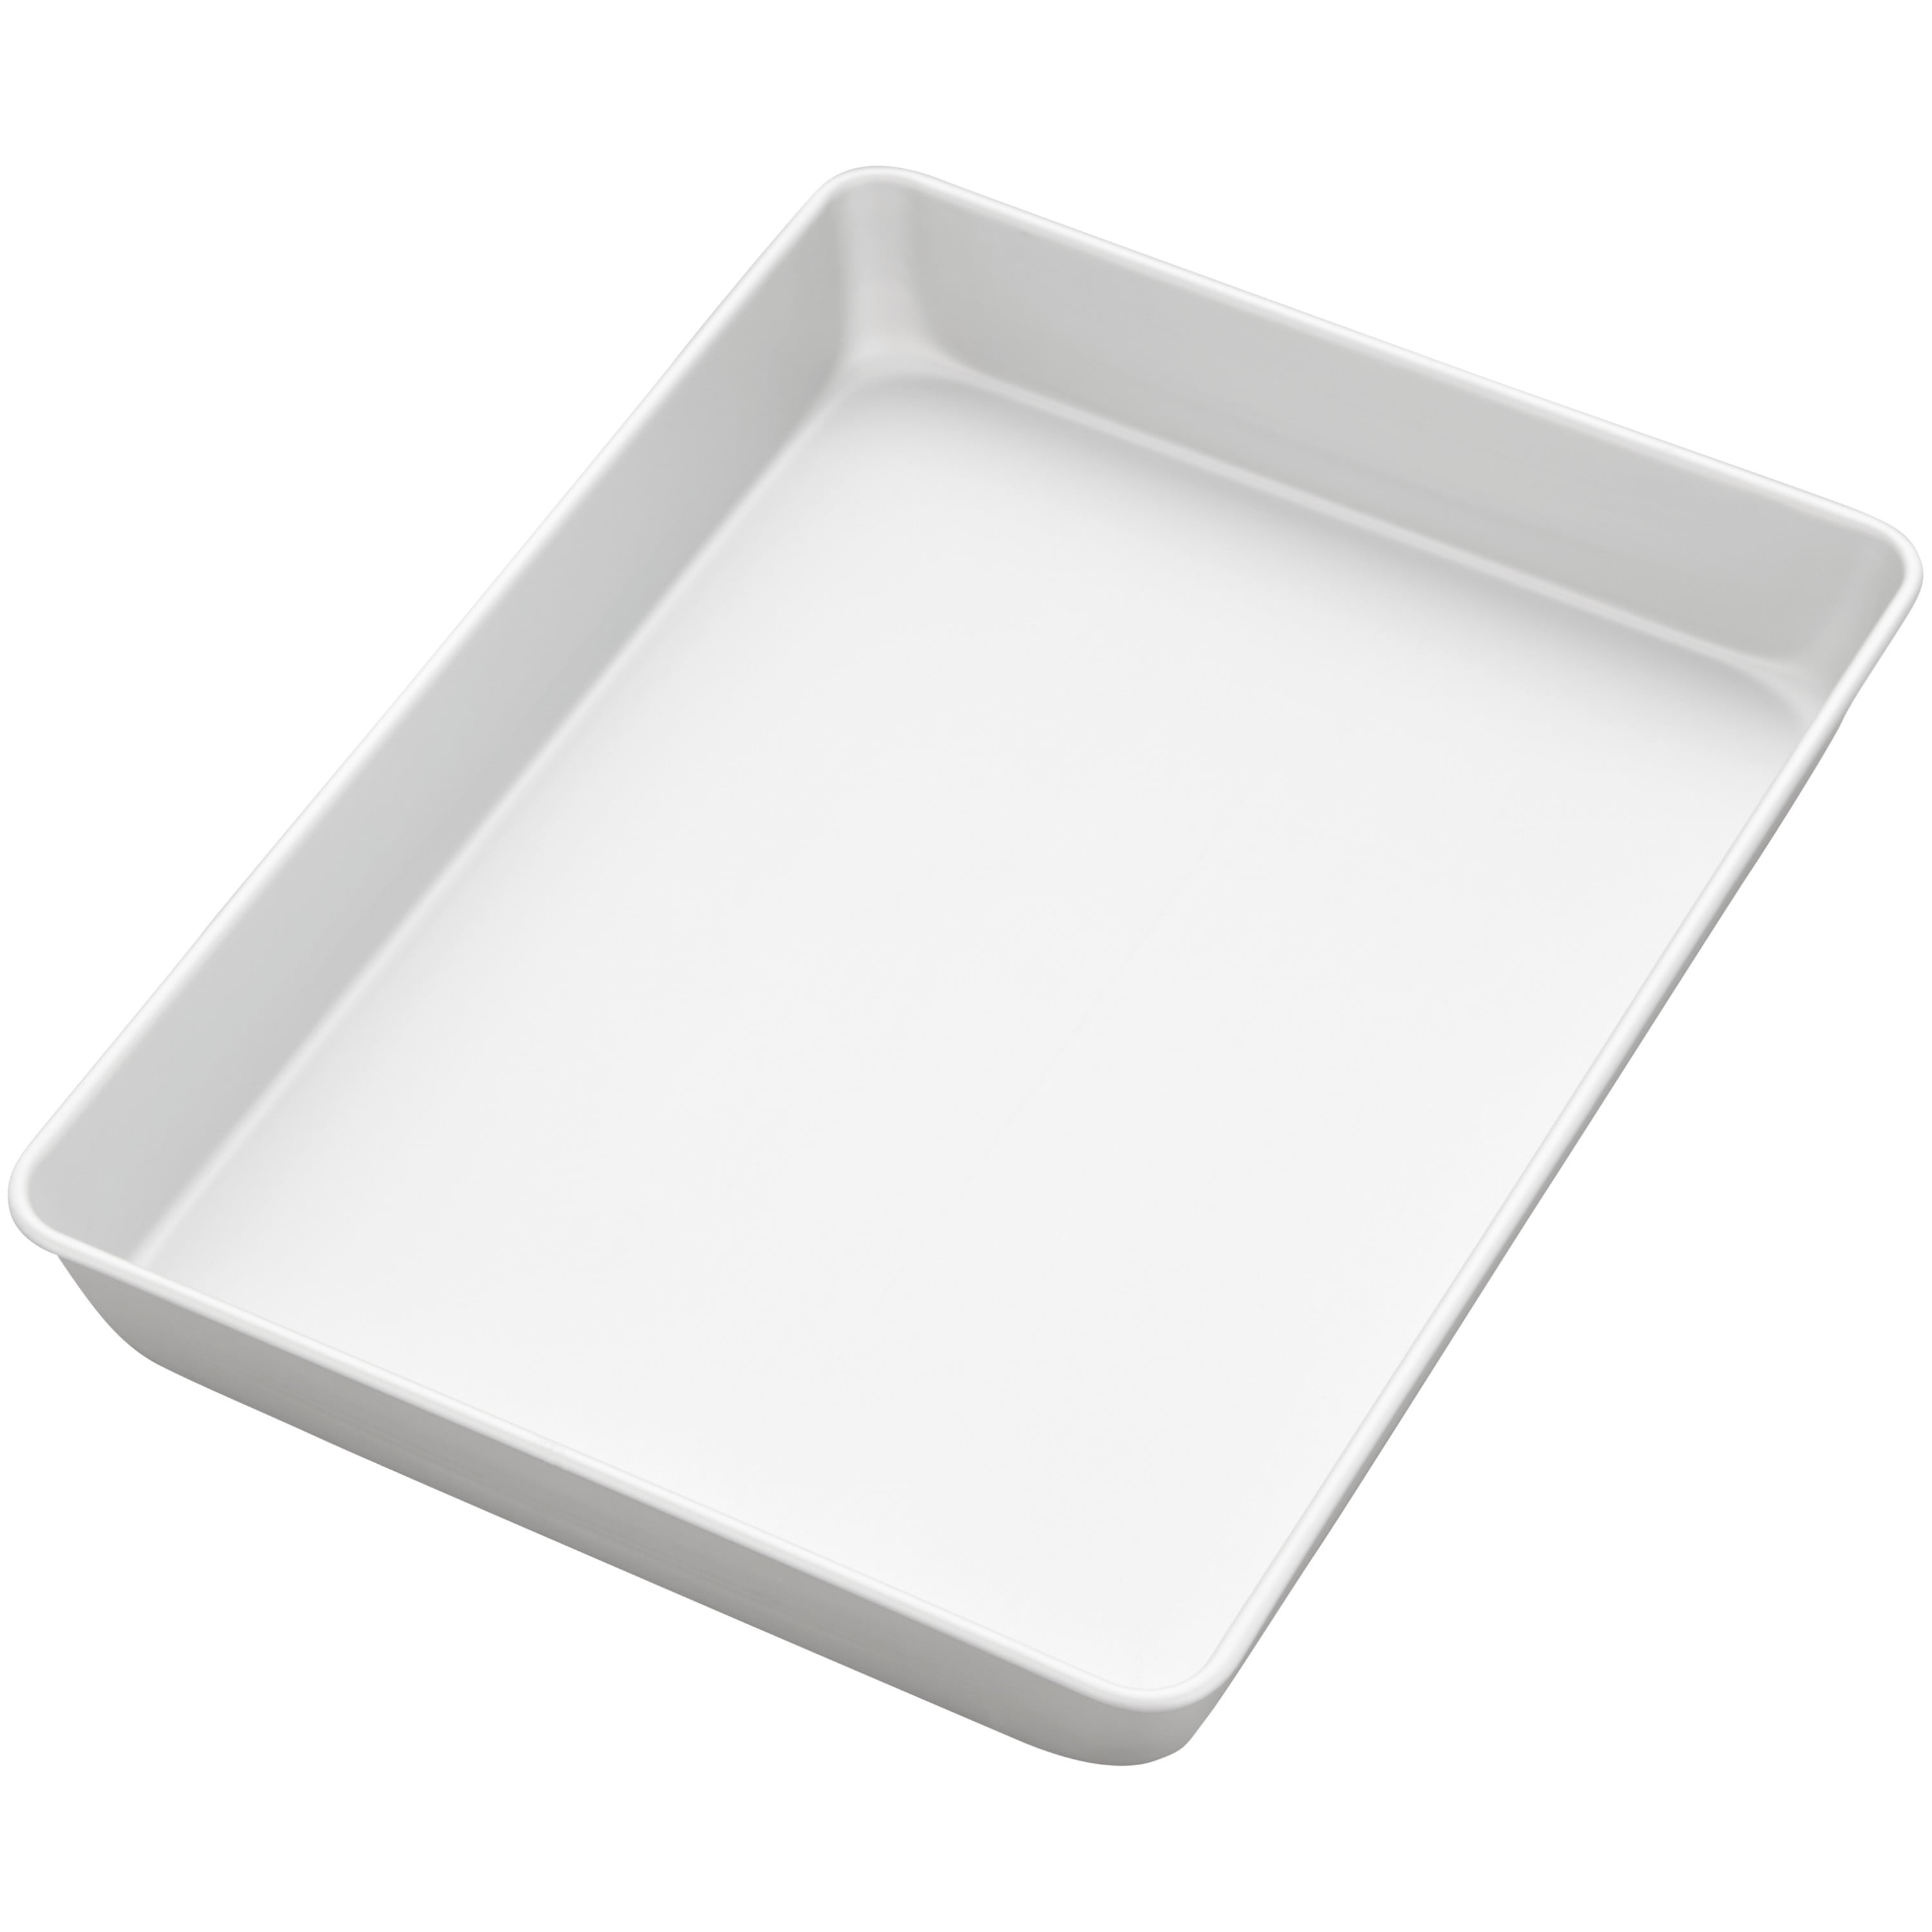 Baked tray with square handles thick aluminum 11" x 11" durable used on the oven 